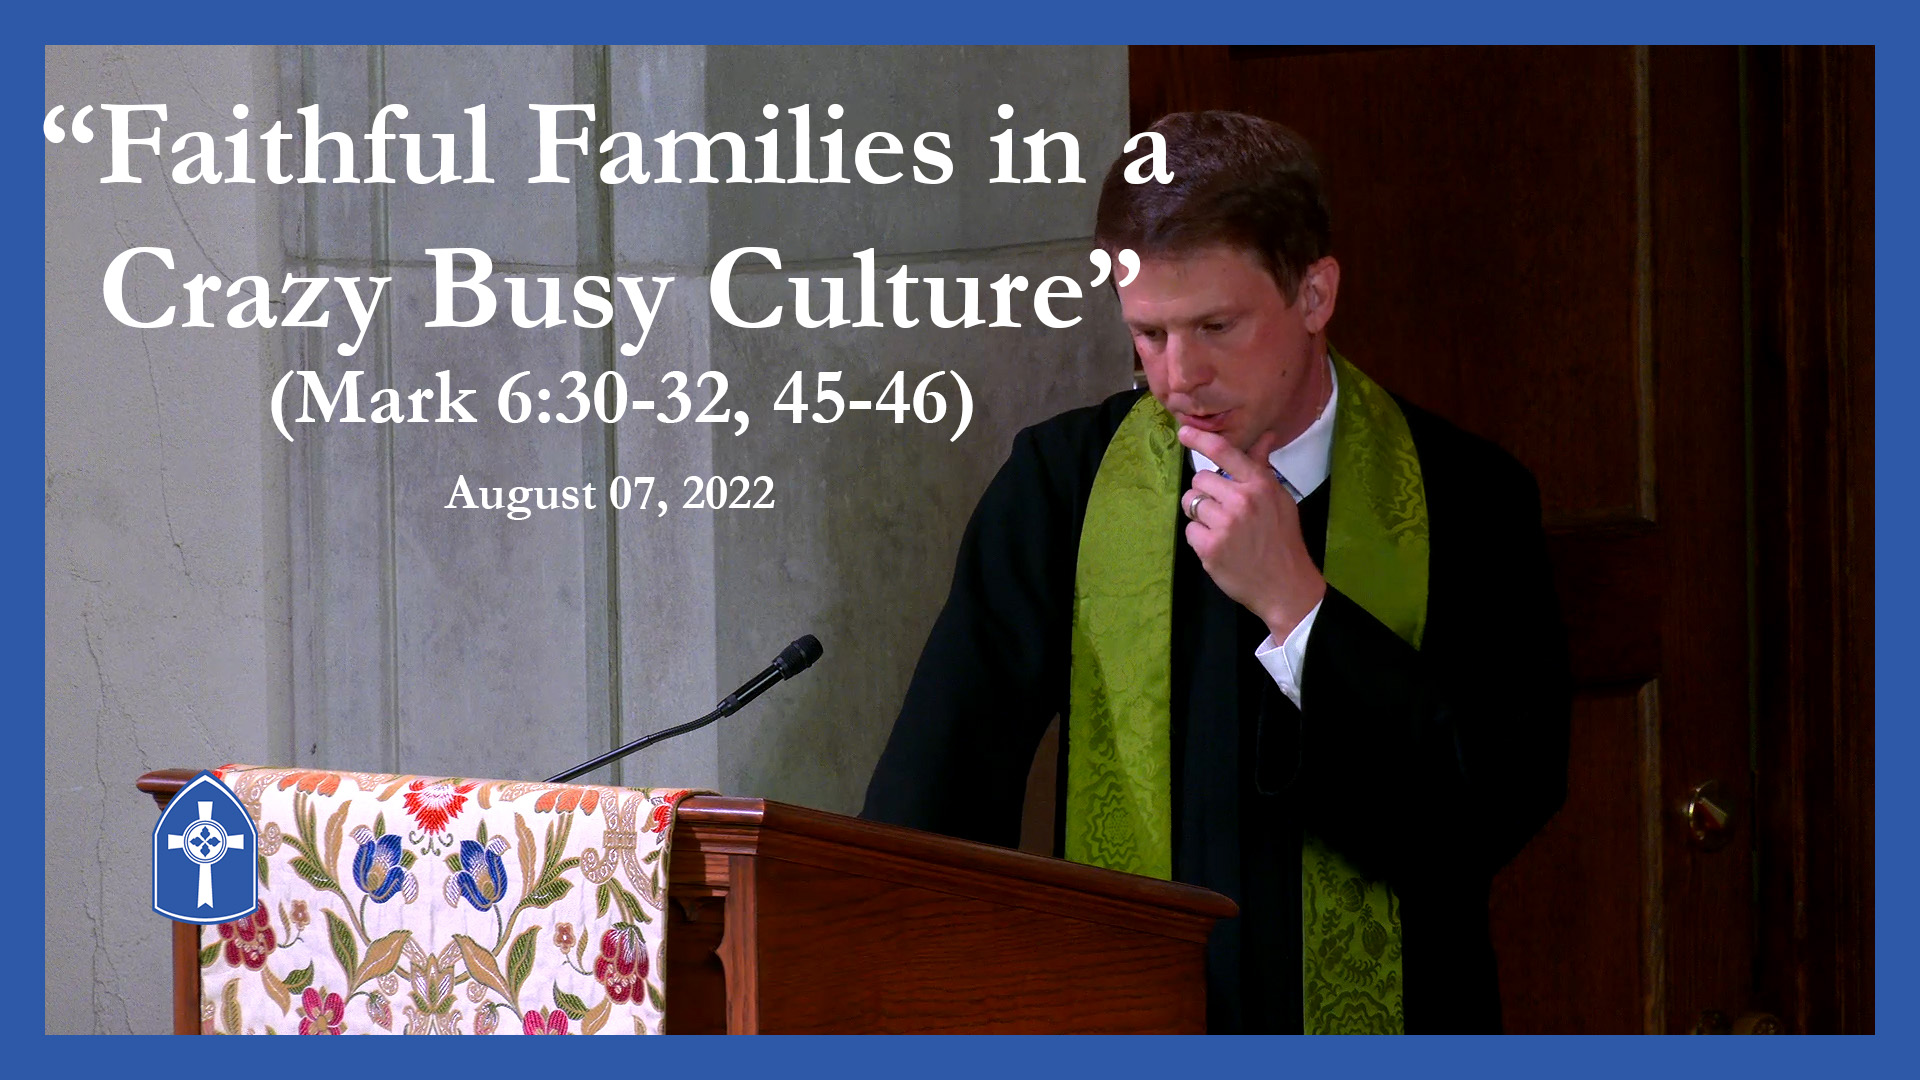 August 7 - Faithful Families in a Crazy Busy Culture